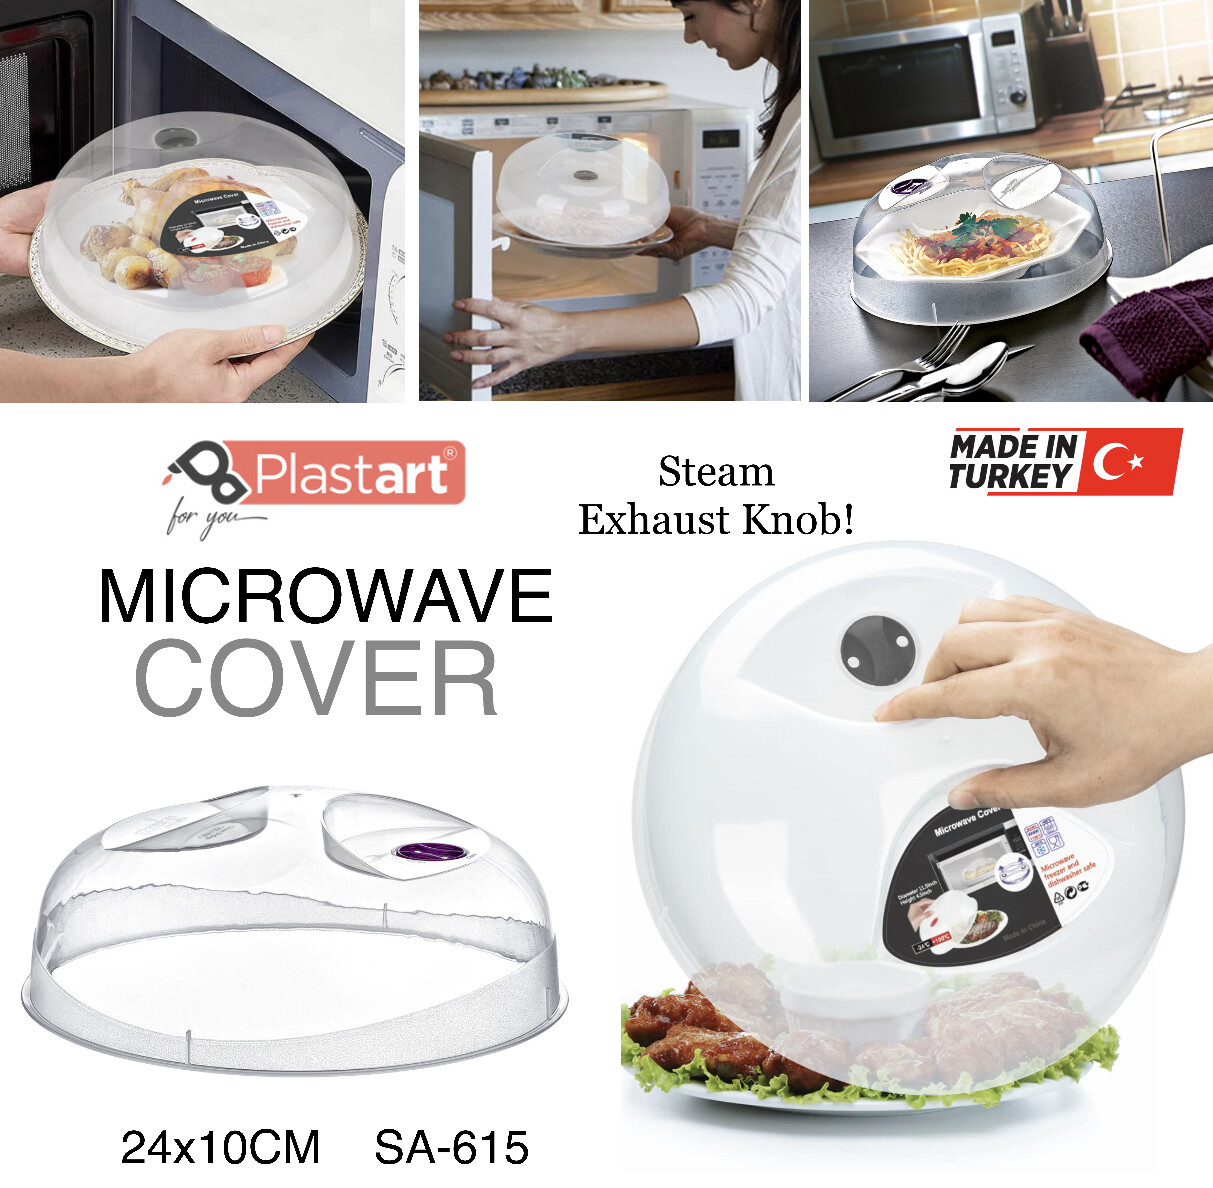 Microwave Cover